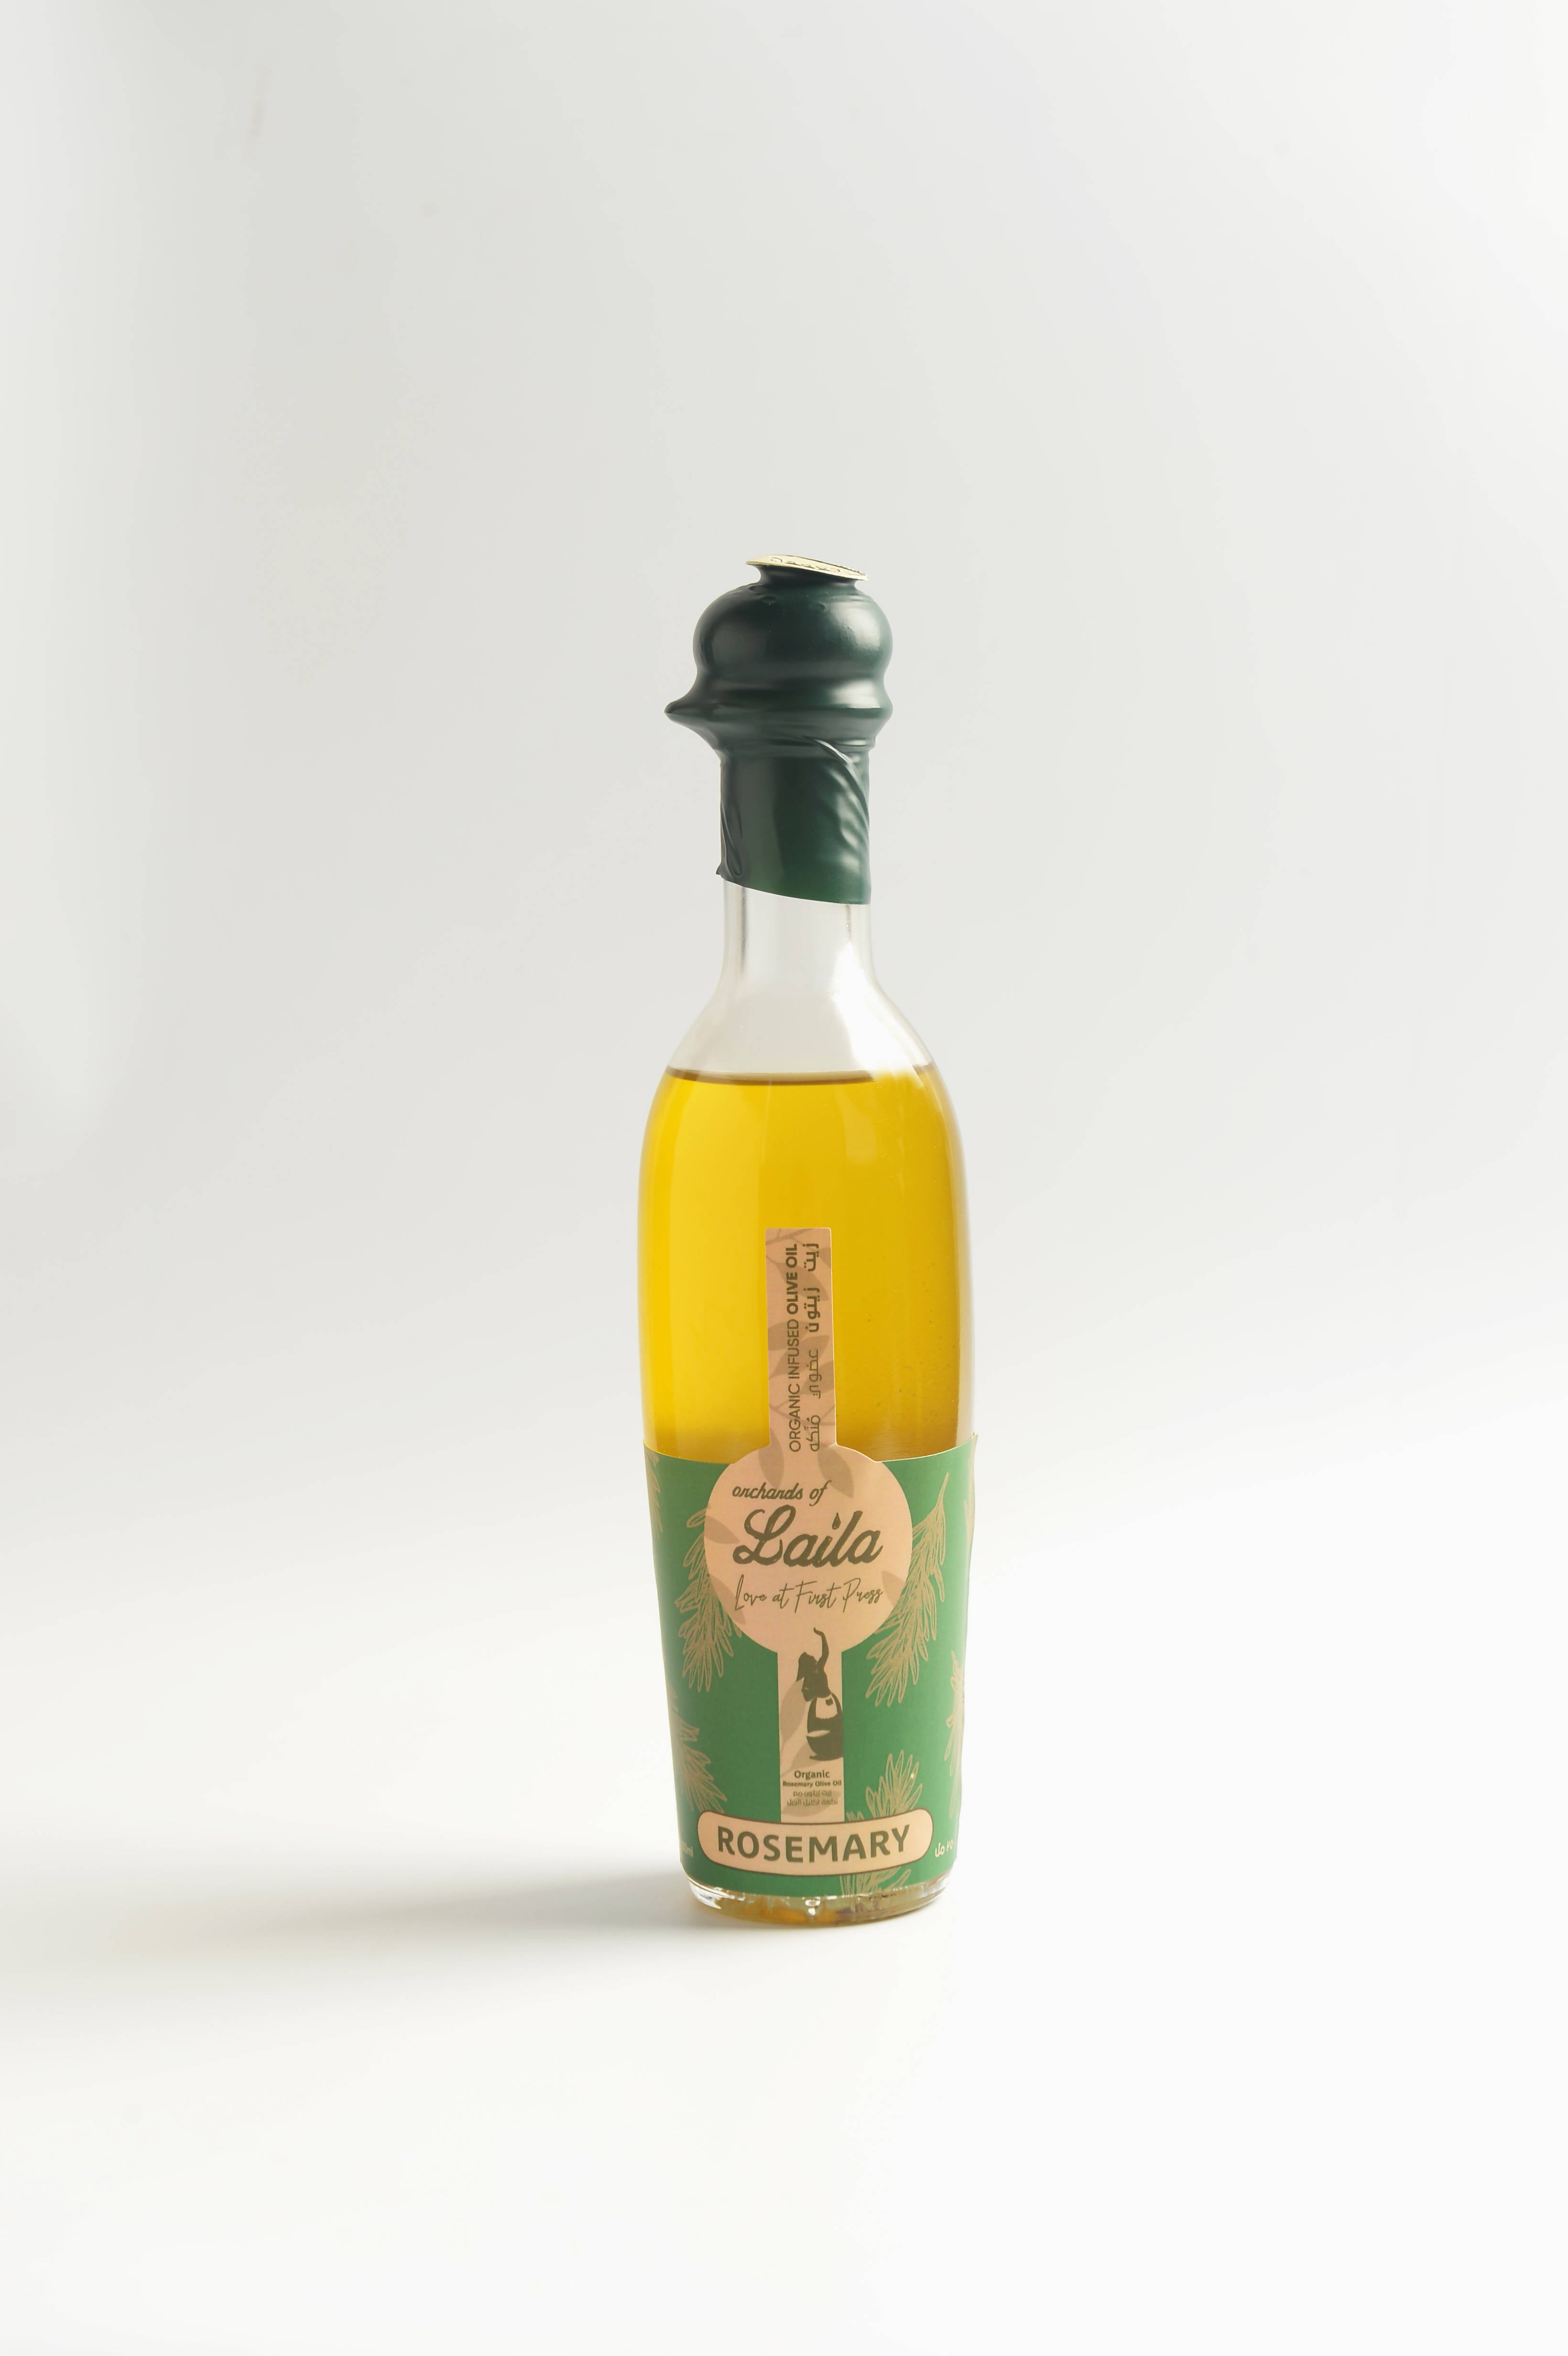 Orchards Of Laila Infused Olive Oil 250 ml Organic Rosemary